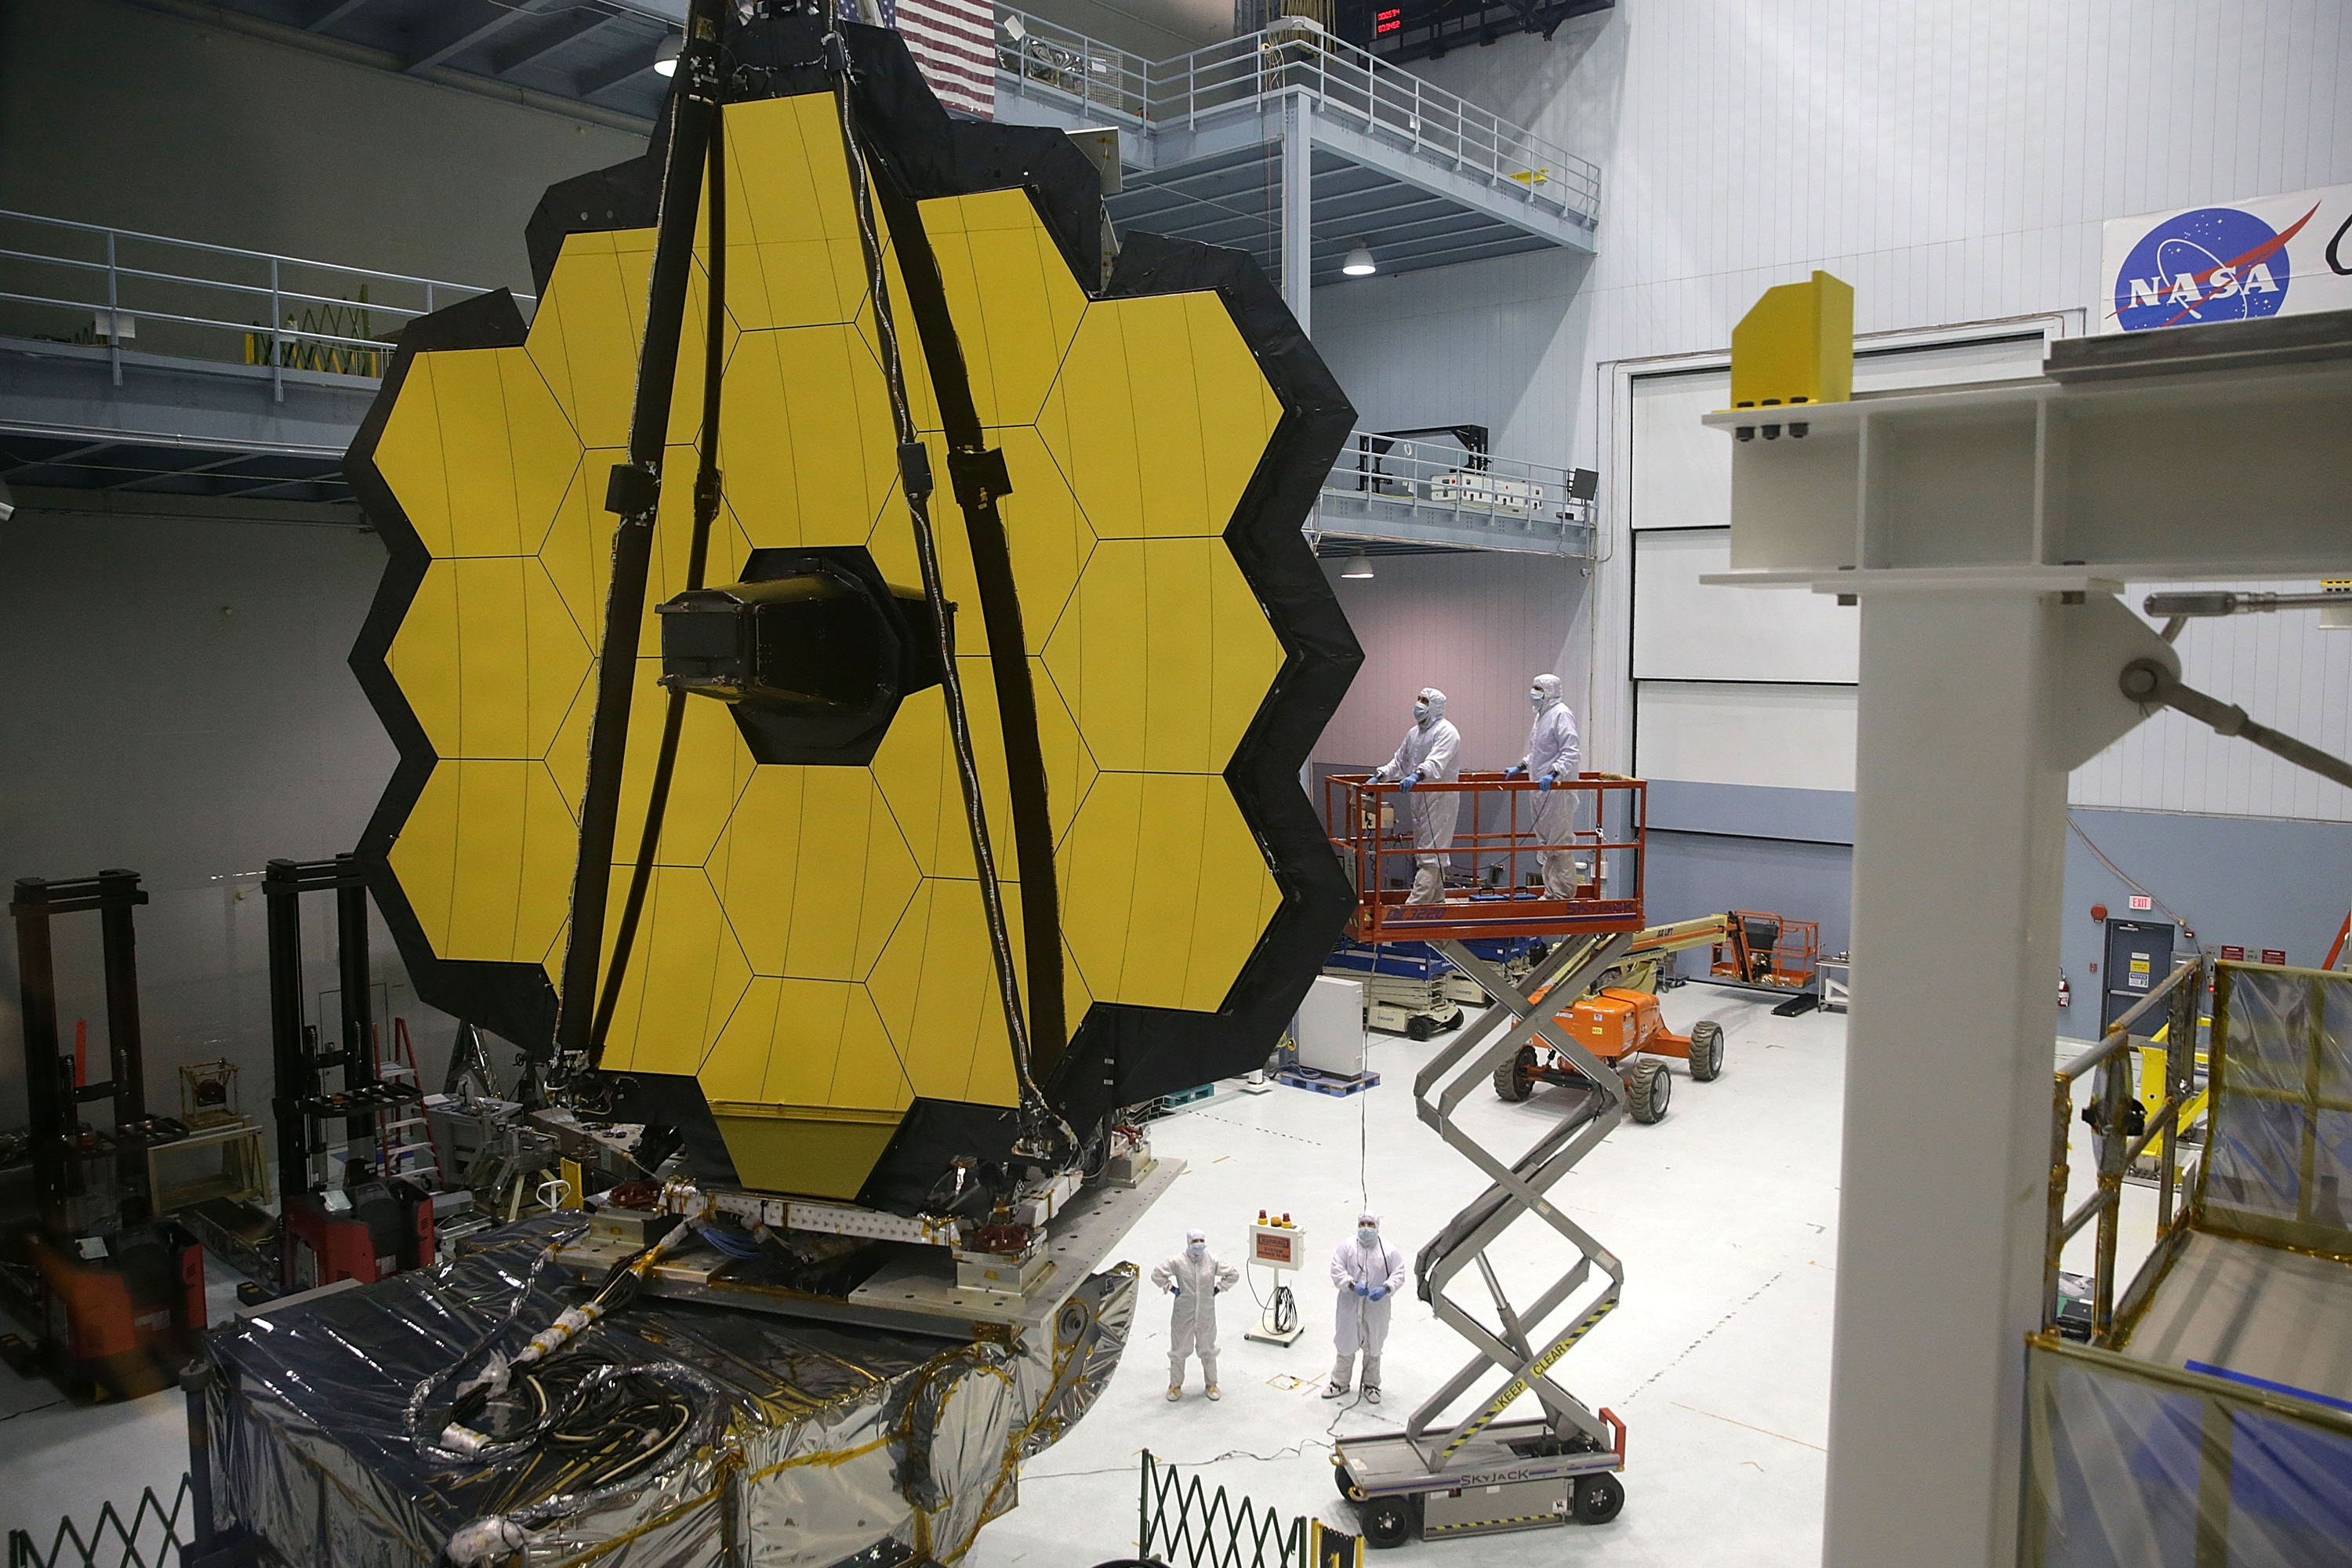 Engineers and technicians assemble the James Webb Space Telescope on Nov. 2, 2016 at NASA's Goddard Space Flight Center in Greenbelt, Maryland. The telescope, designed to be a large space-based observatory optimized for infrared wavelengths, will be the successor to the Hubble Space Telescope and the Spitzer Space Telescope. (Photo by Alex Wong/Getty Images)